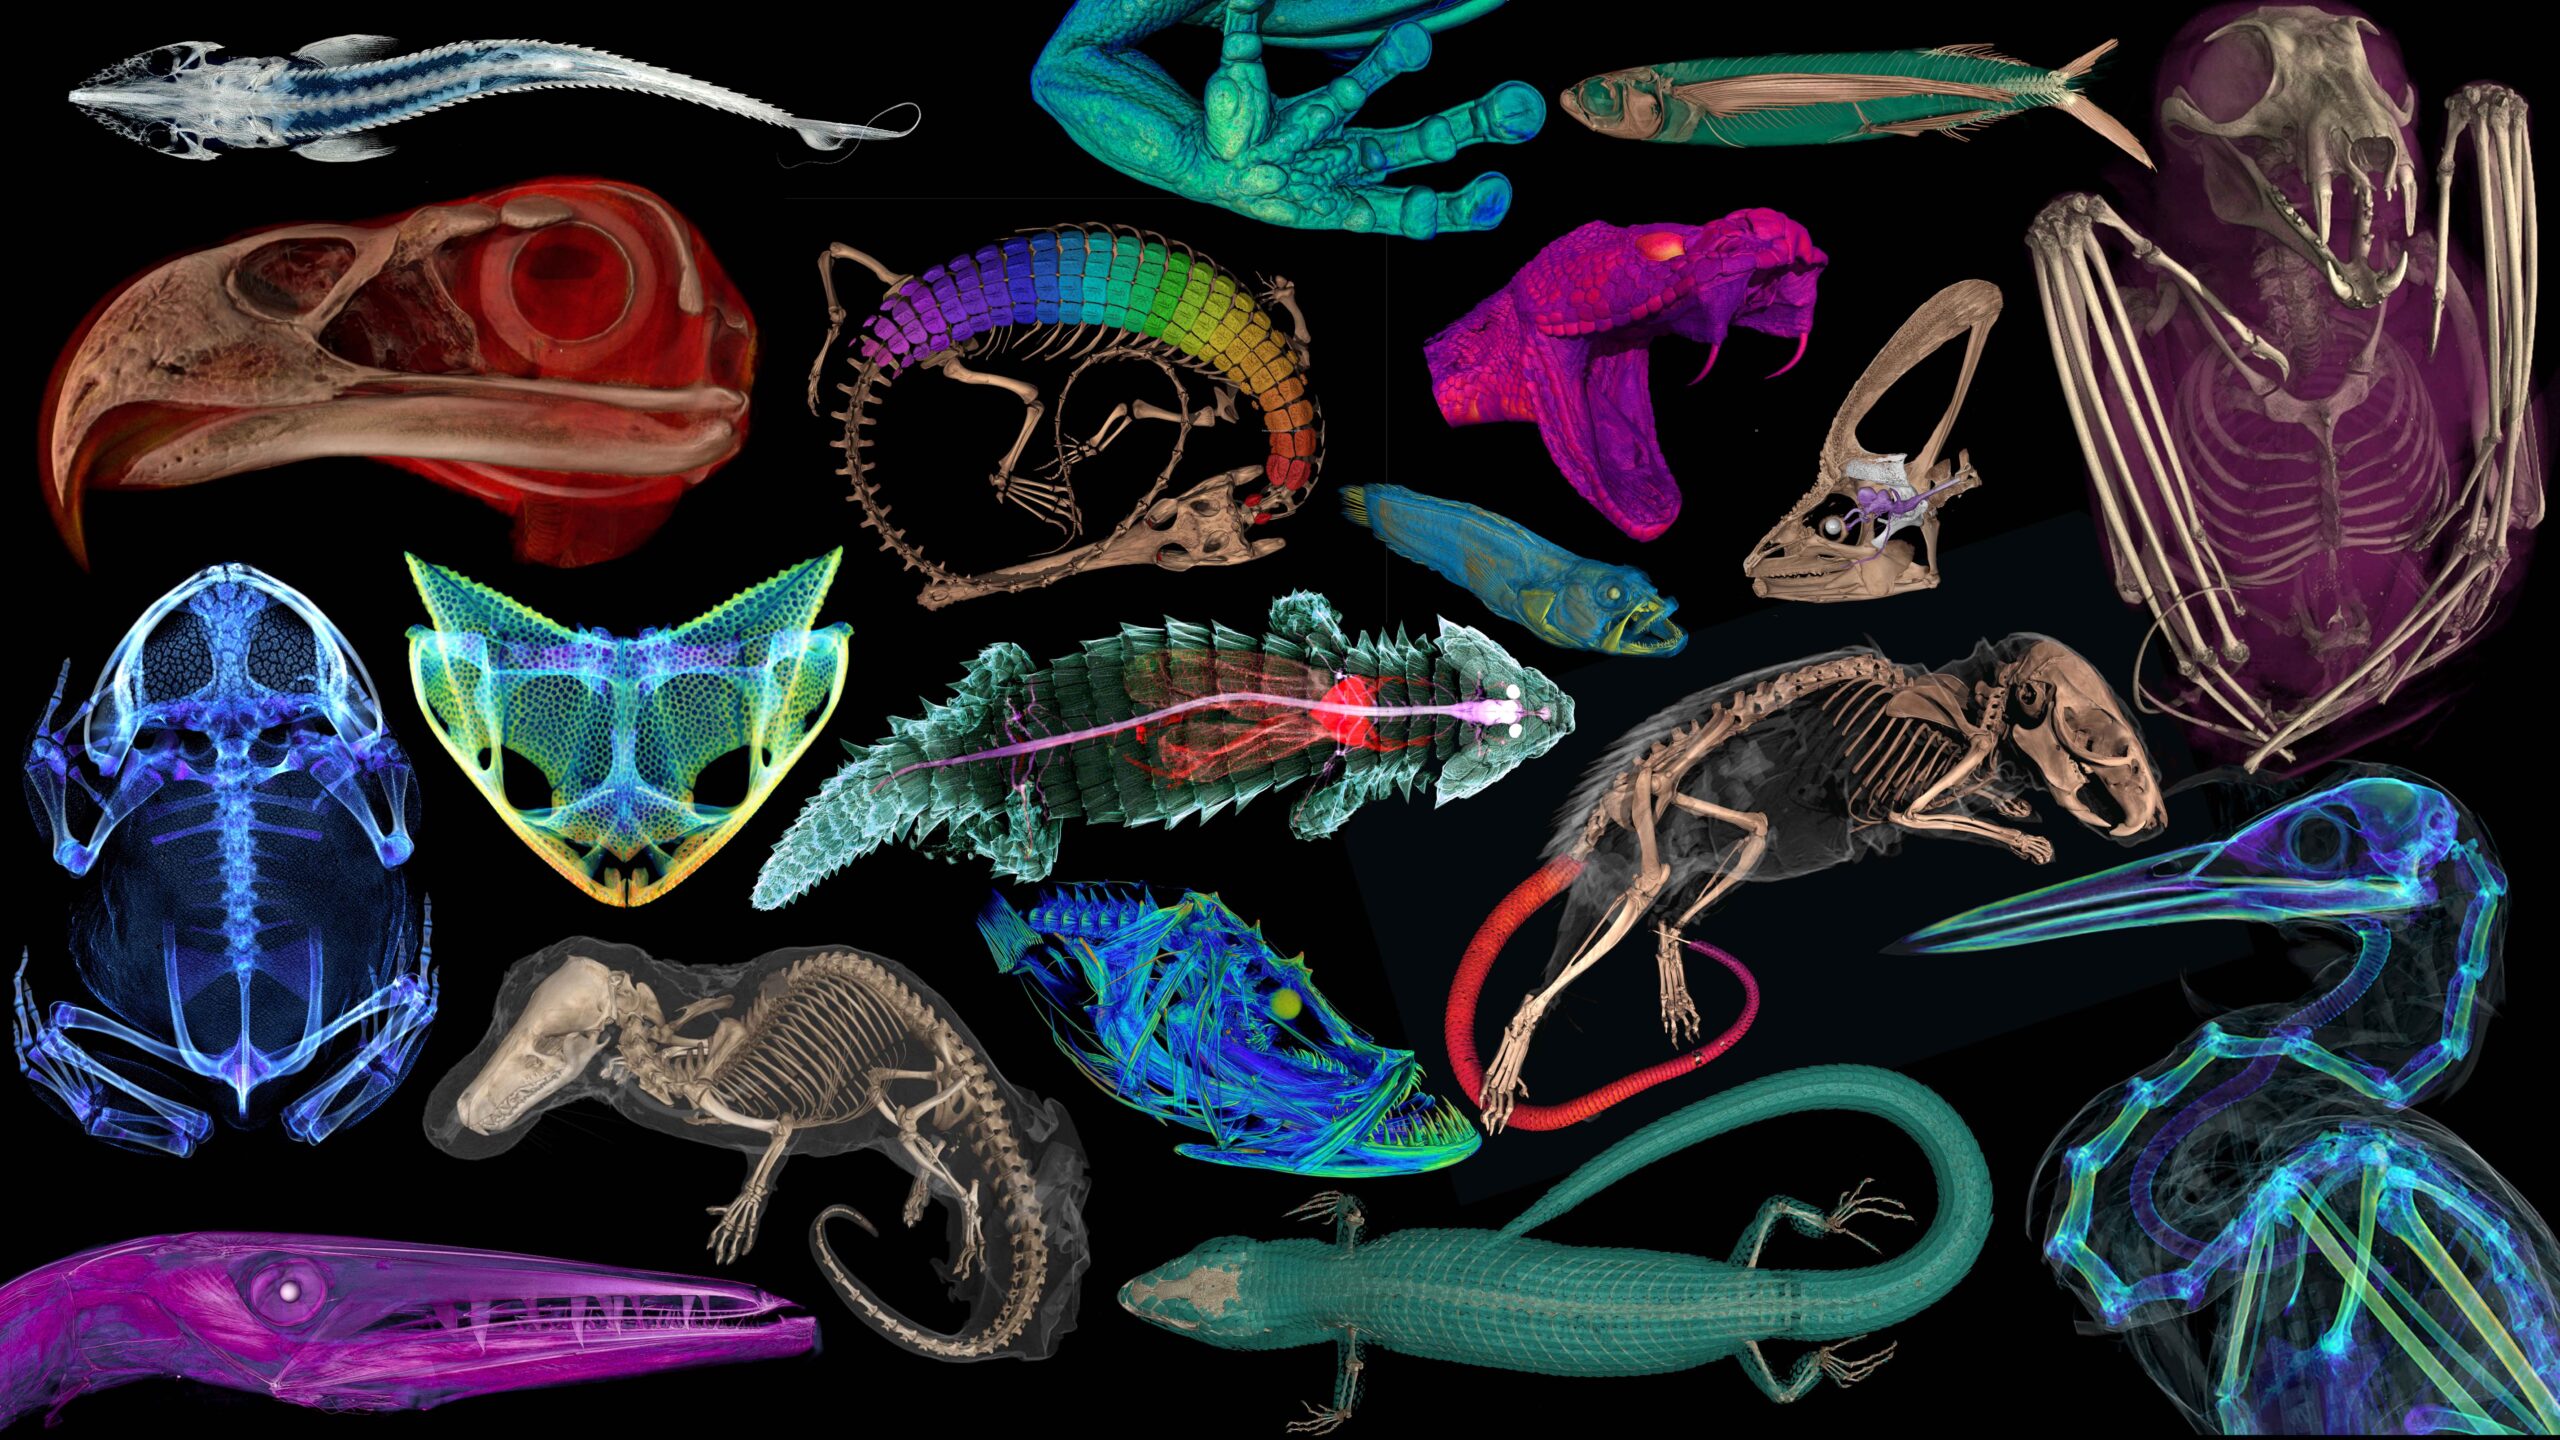 Take a look inside 13,000 animals–no scalpel required